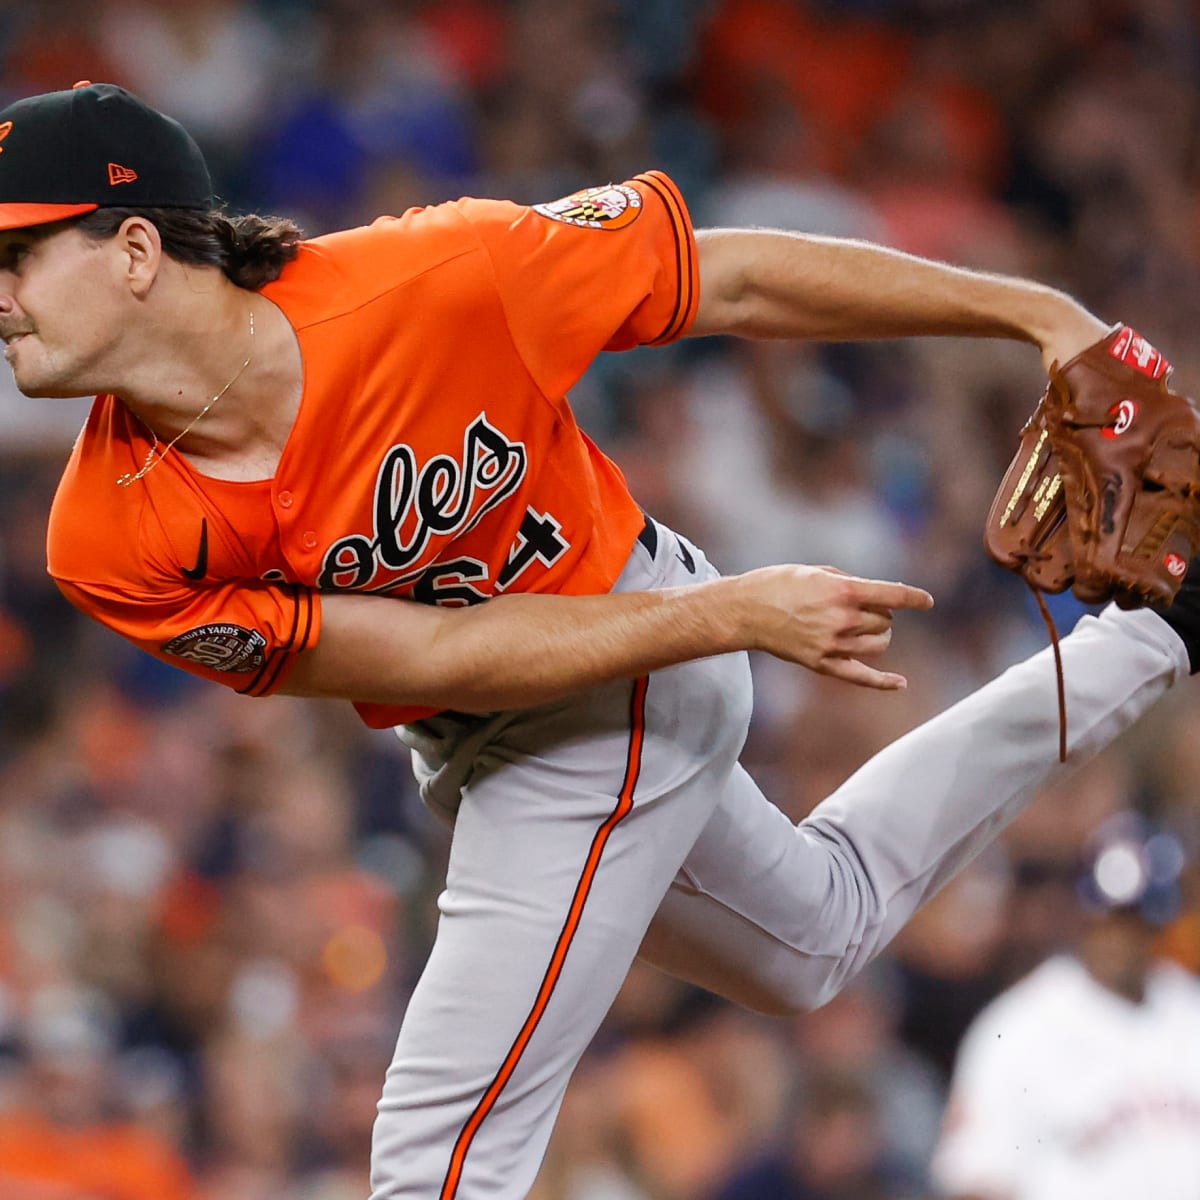 most popular mlb jersey Dean Kremer shuts down Blue Jays, Orioles come back  to win 4-2